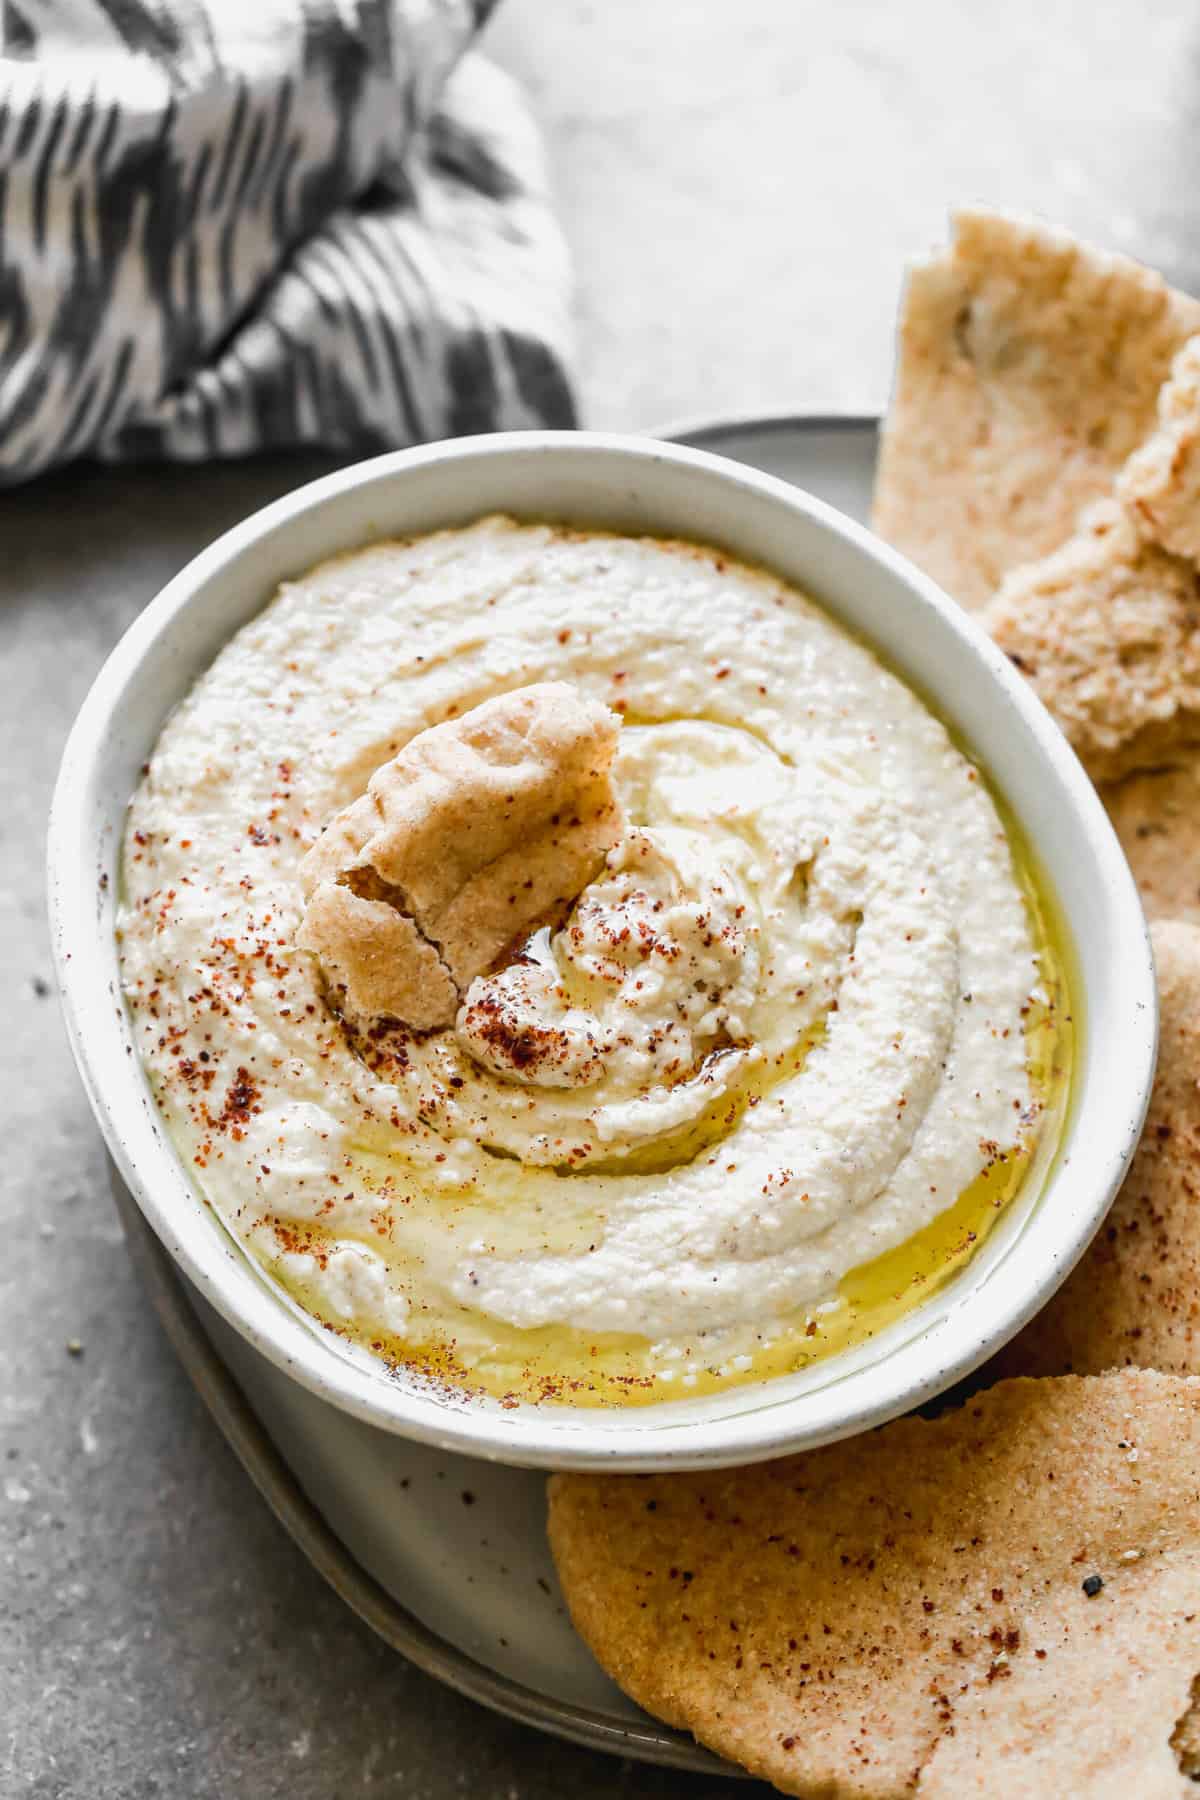 A bowl of homemade hummus with olive oil drizzled and sumac, with a piece of pita bread dipped in it